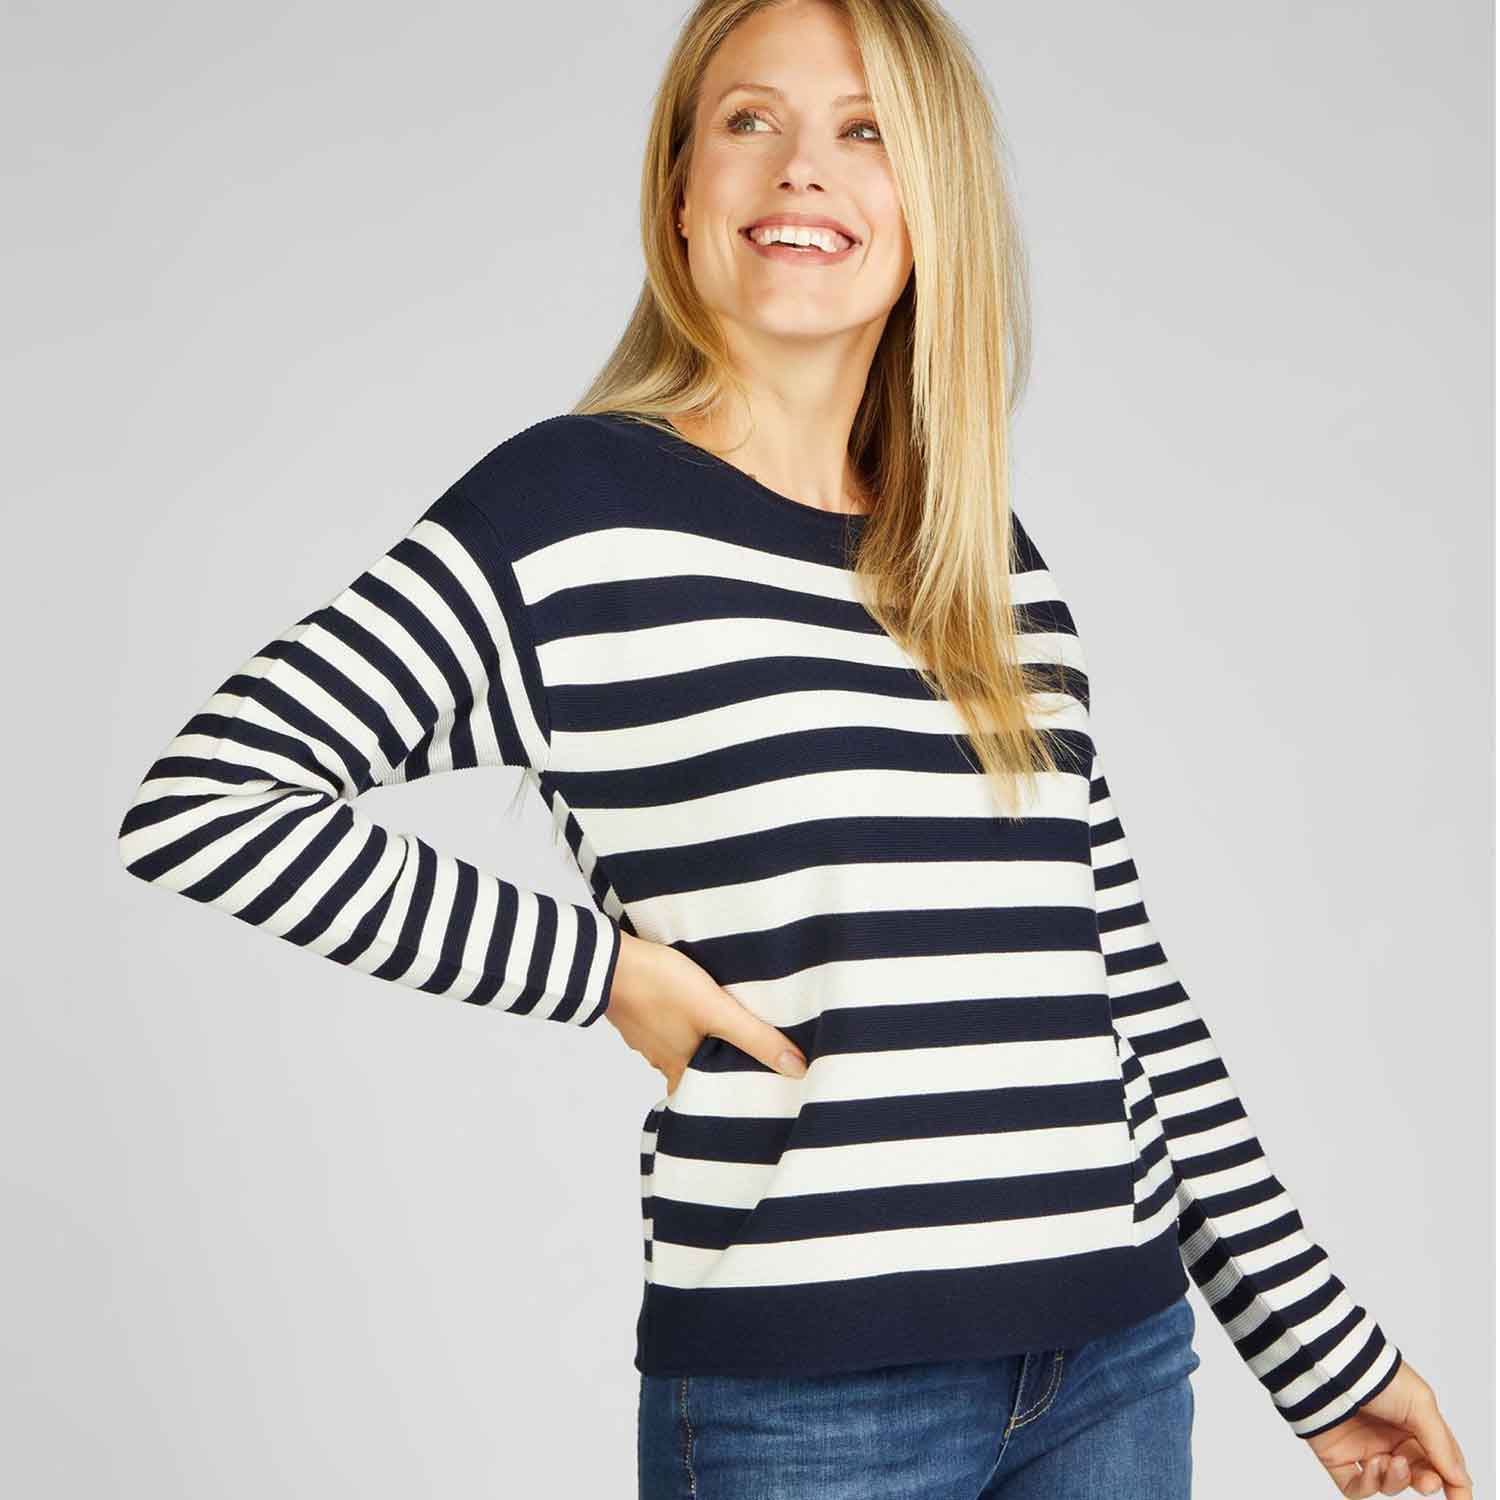 – Jumper Obsessions RABE Marine 51-213612 – Striped in